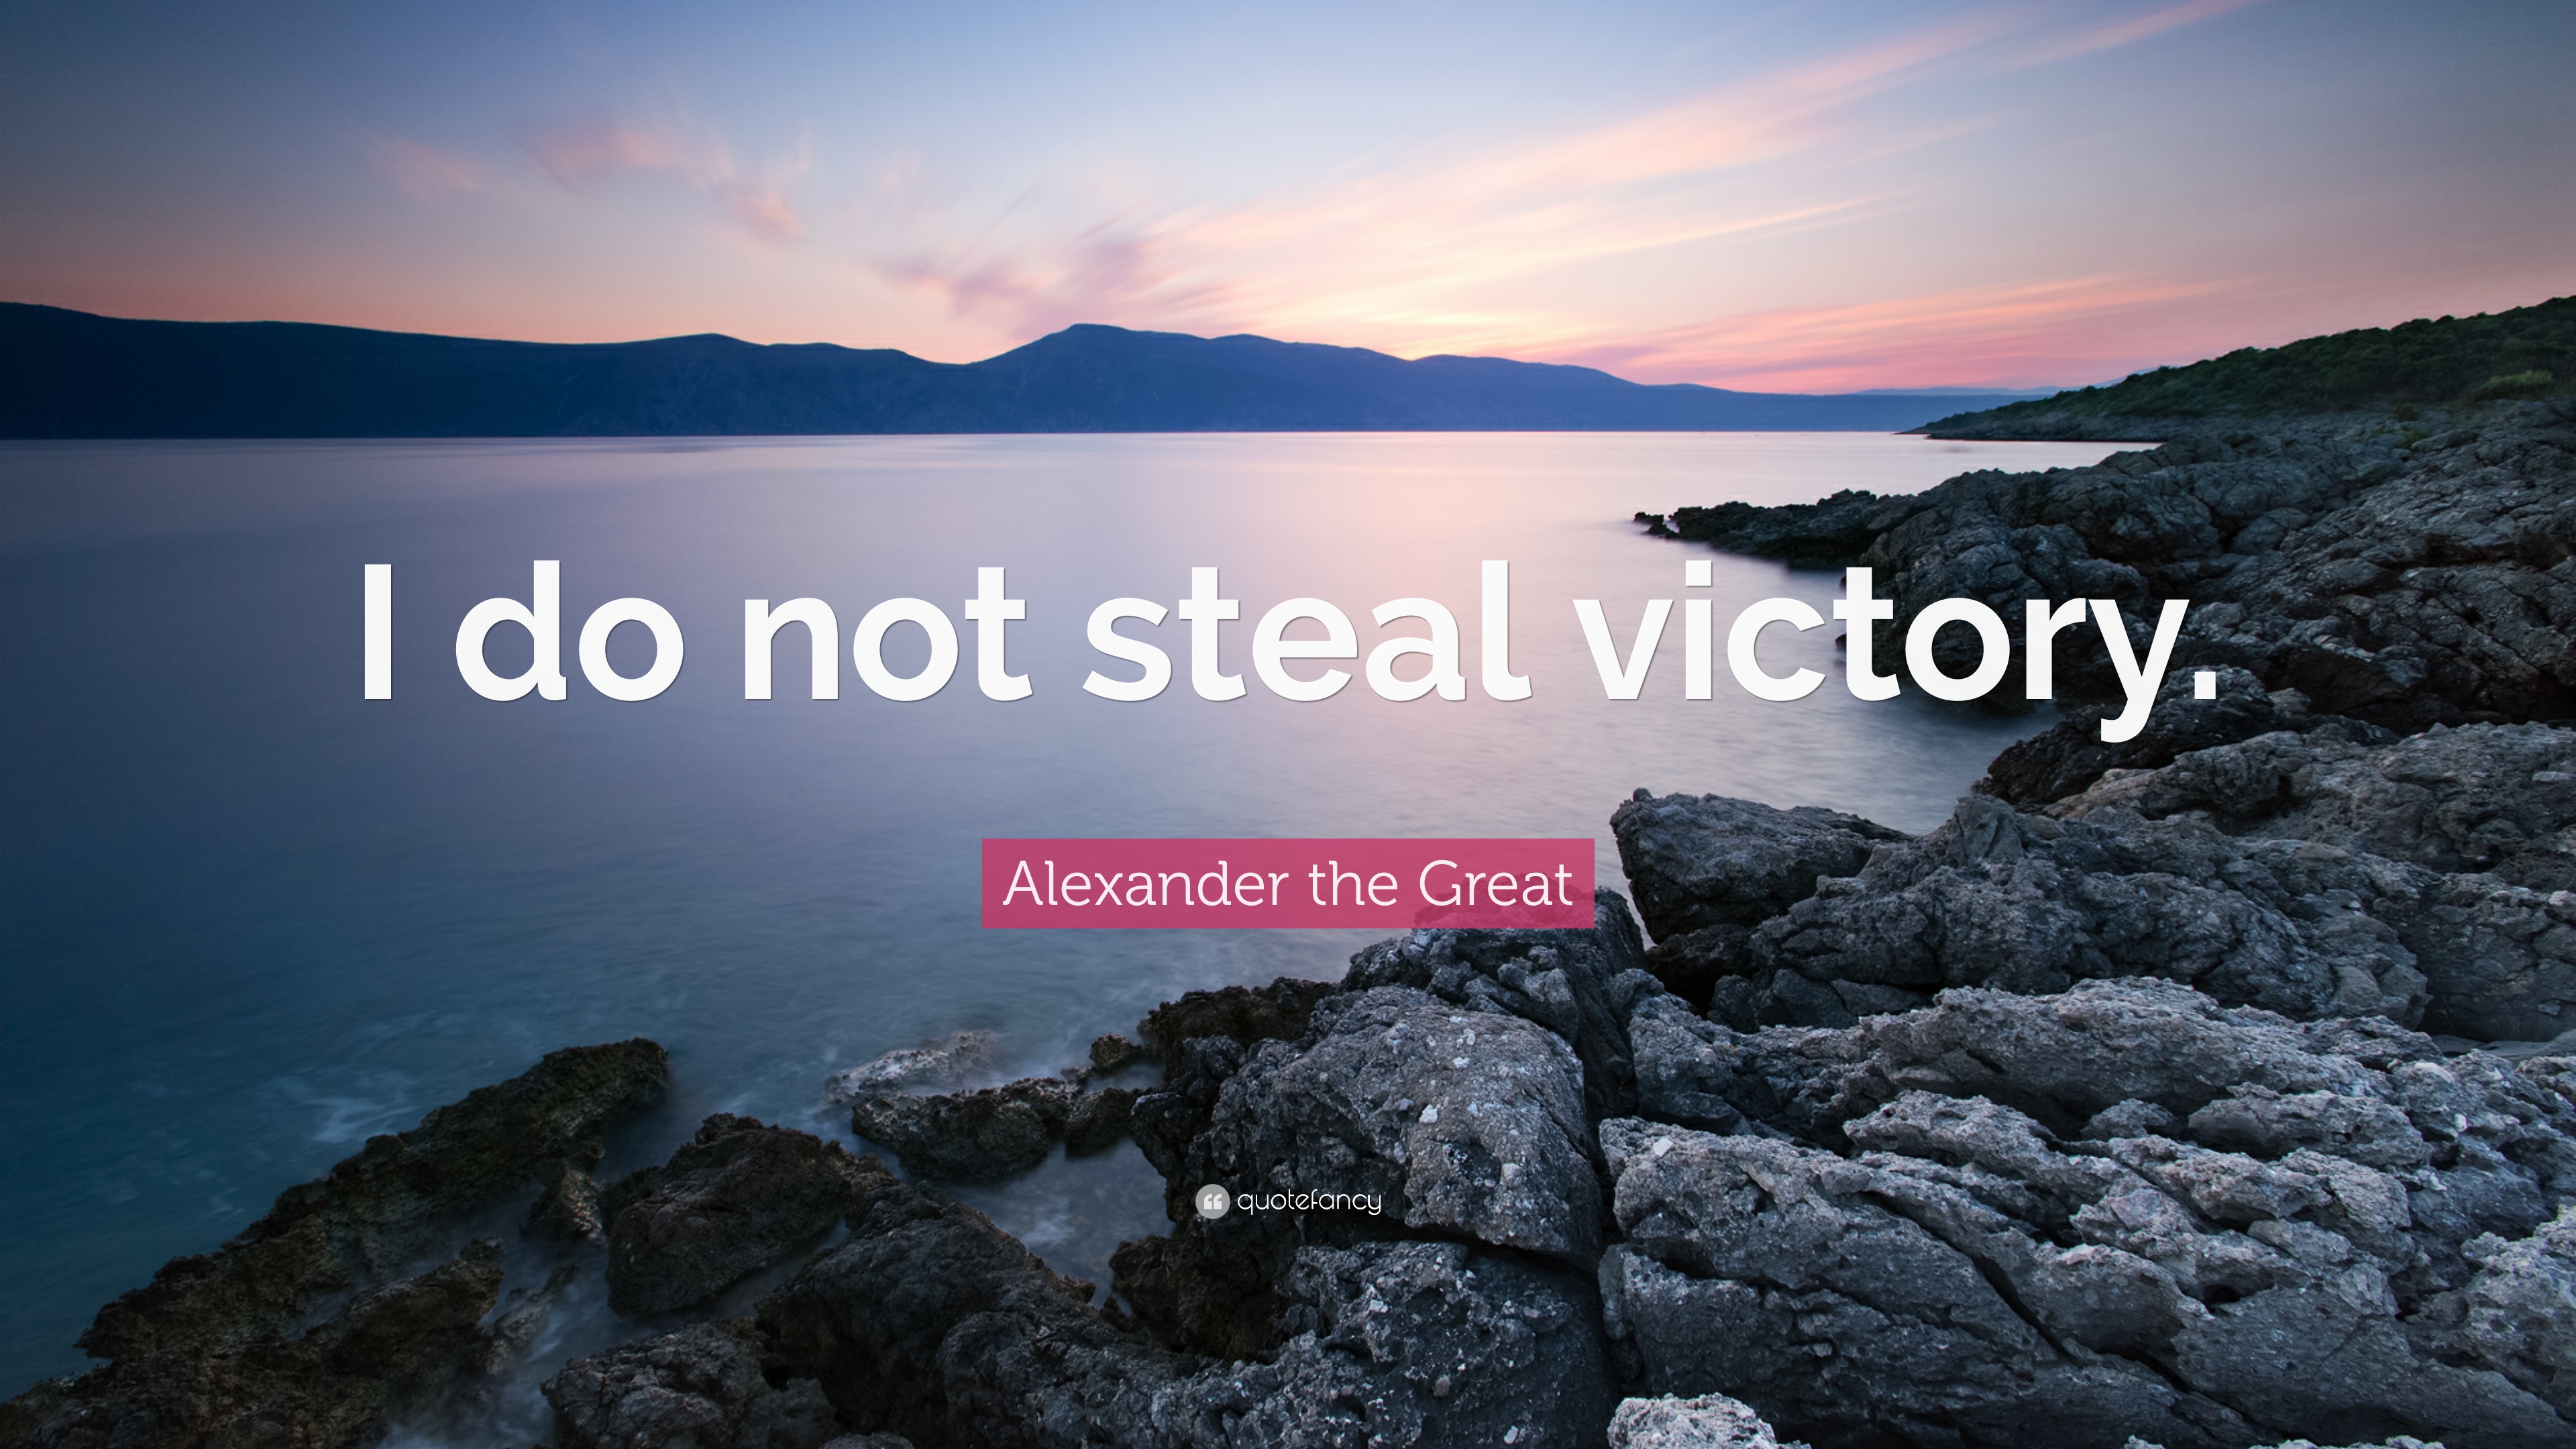 Alexander the Great Quote: “I do not steal victory.” 12 wallpaper